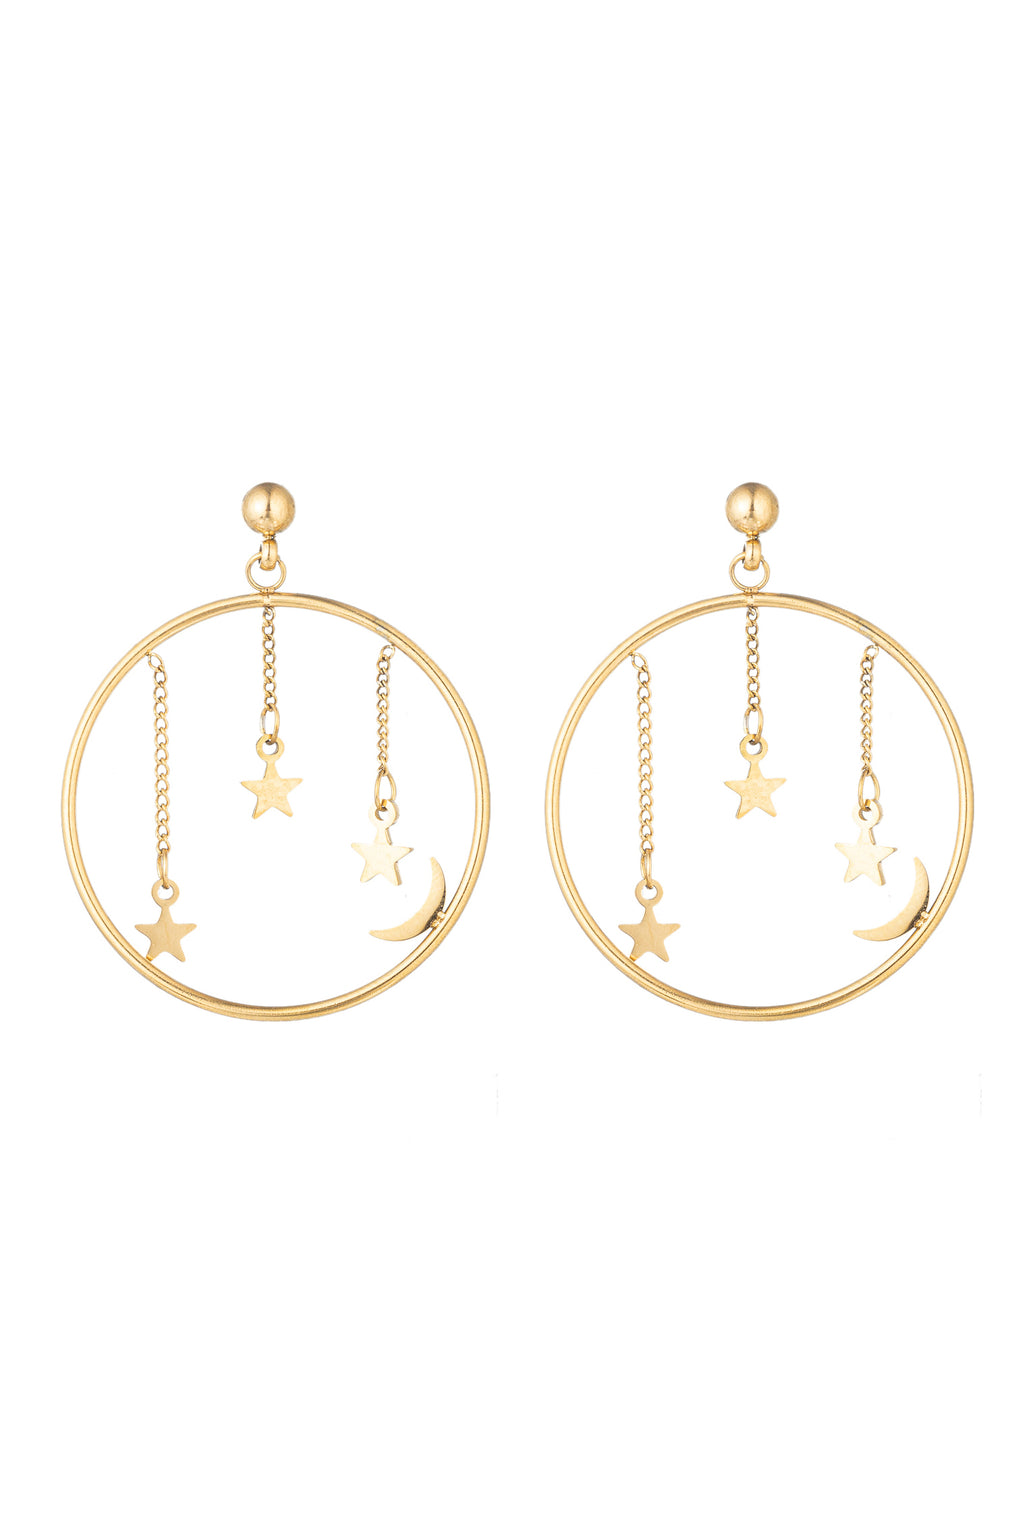 Gold tone brass moon & star pendant hoop earrings studded with CZ crystals.